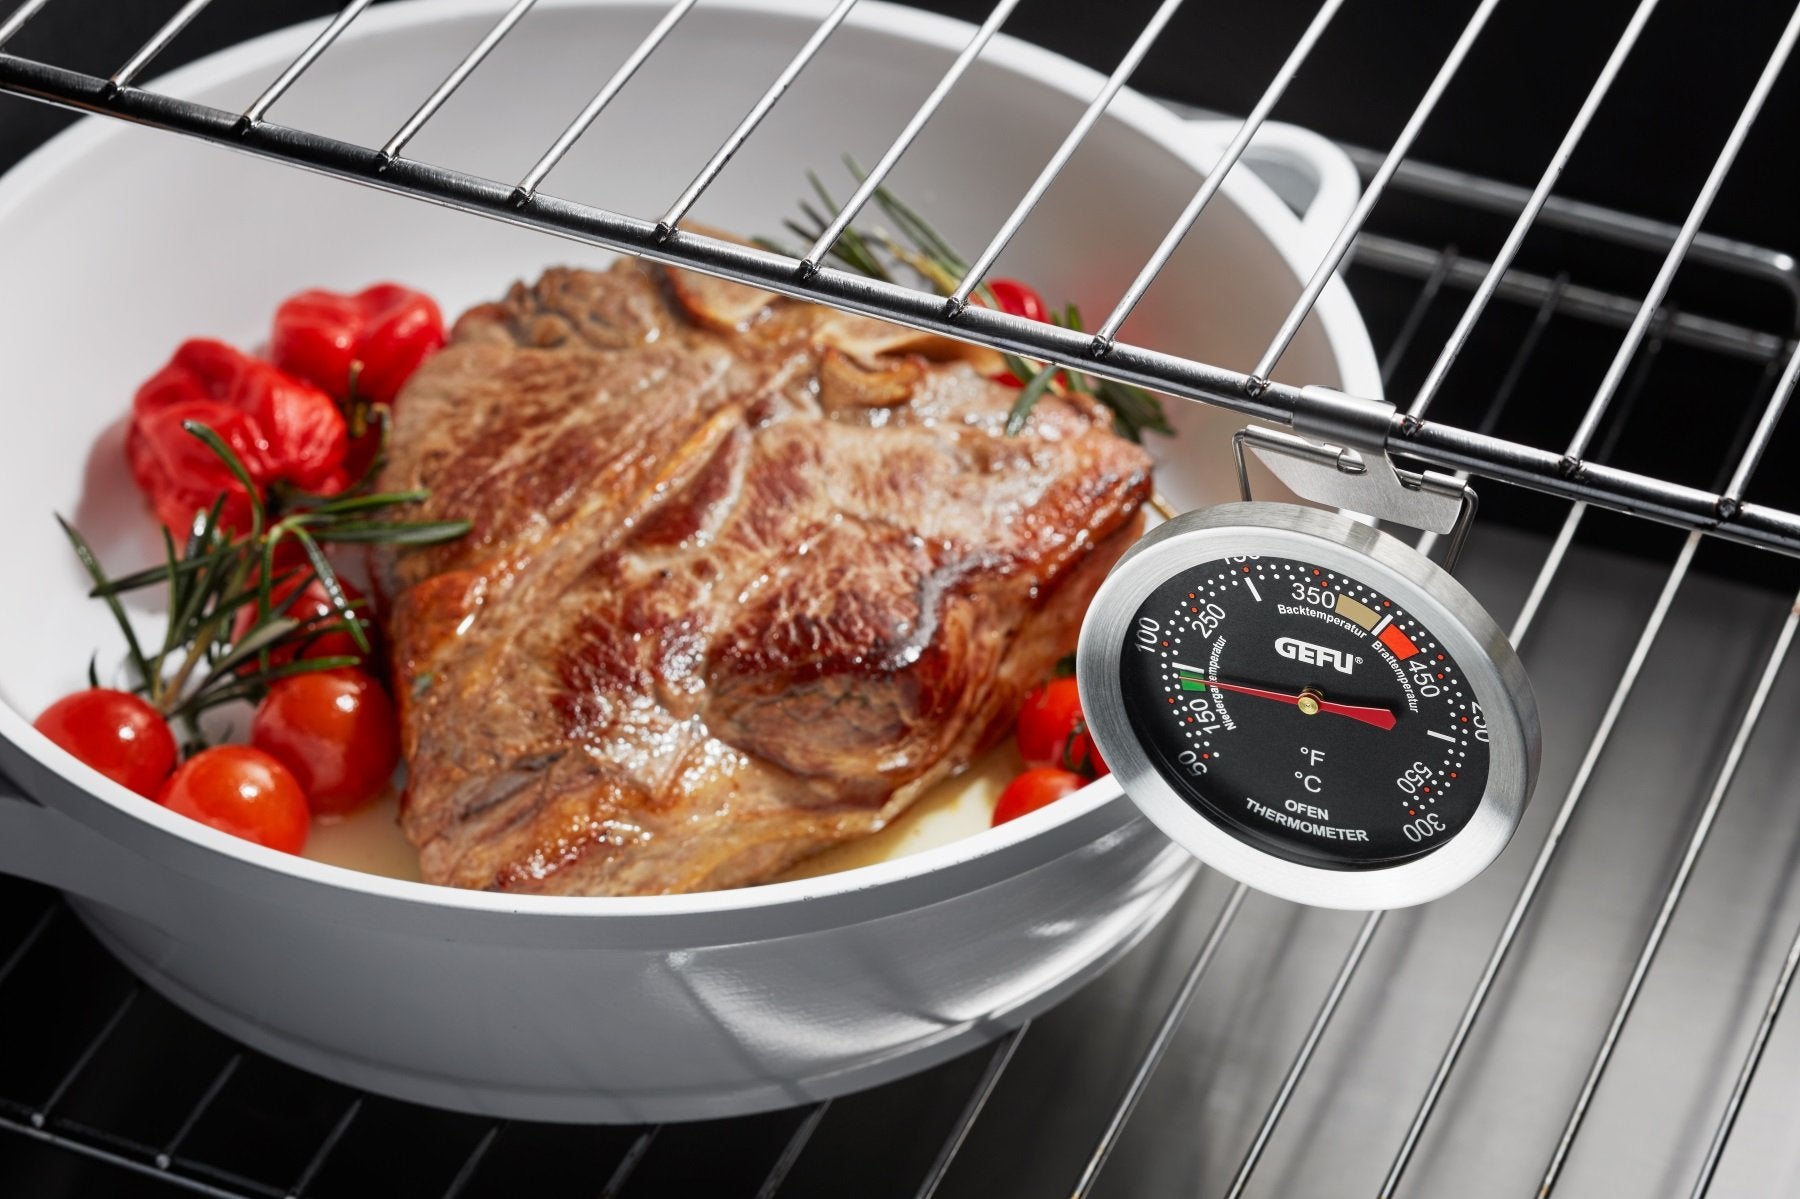 GEFU Oven Thermometer Messimo - Whole and All